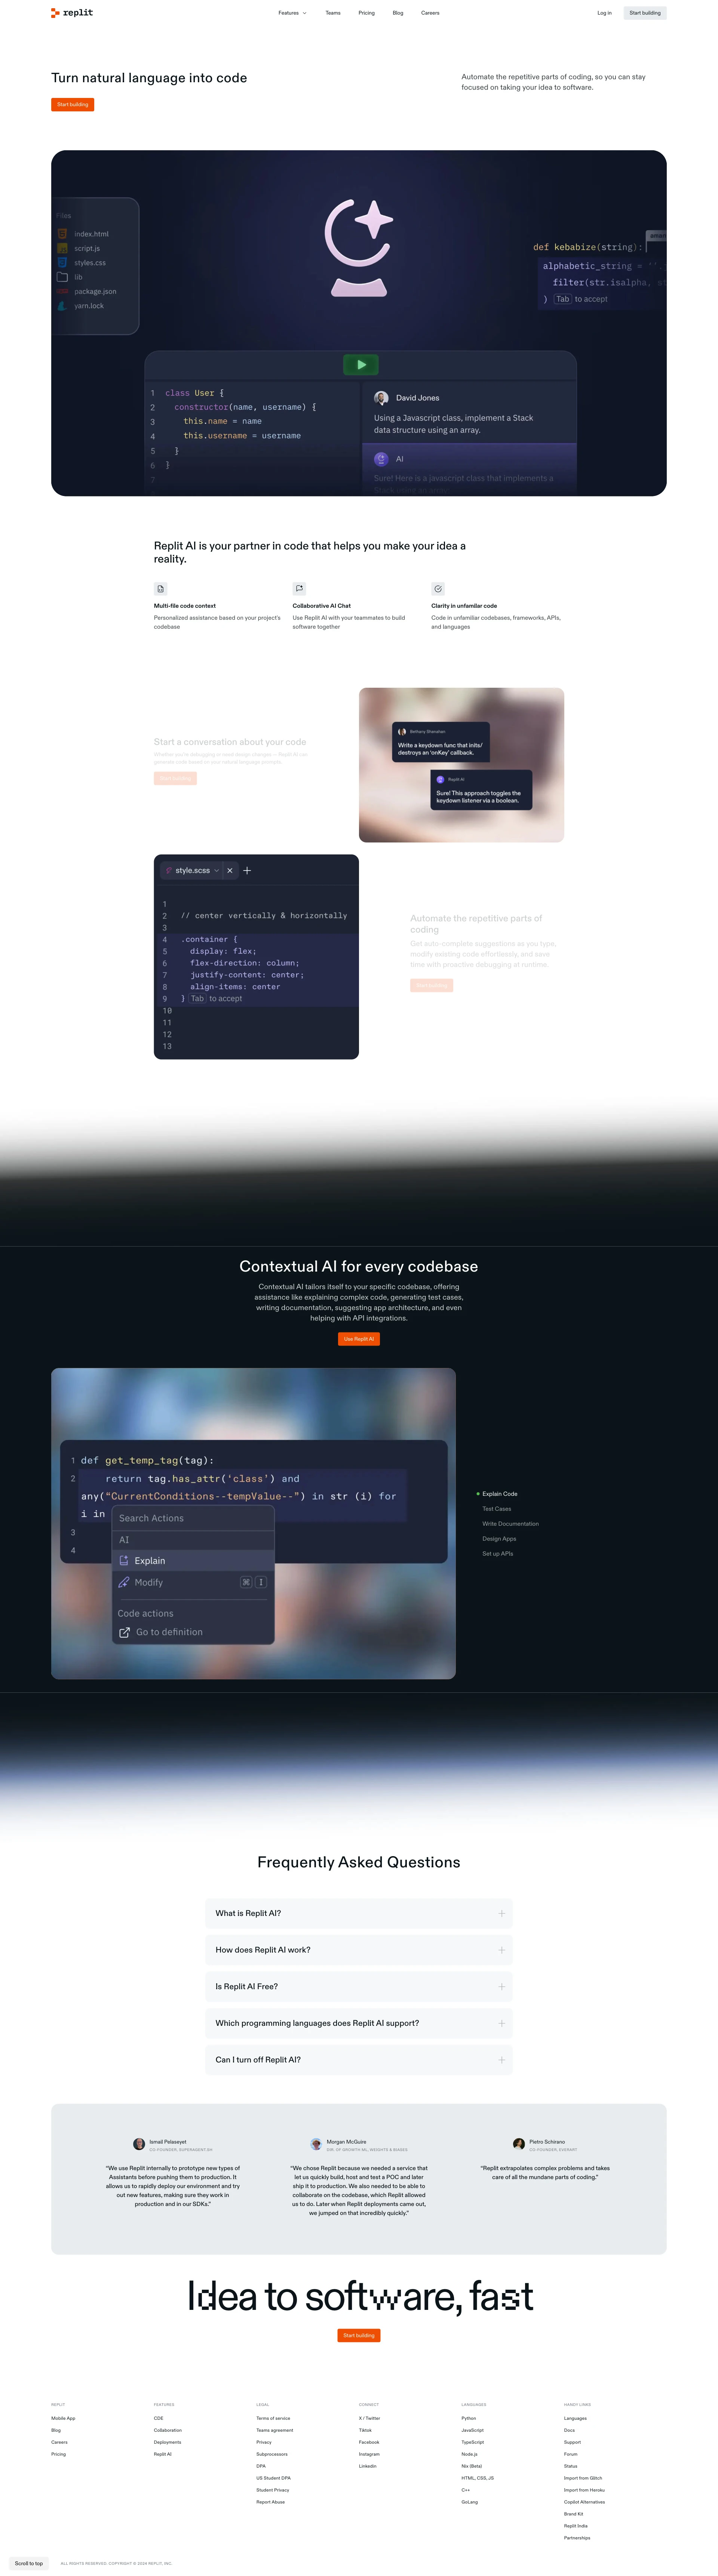 Replit Landing Page Example: Replit is an AI-driven software creation platform where everyone can build, share, and ship software fast.